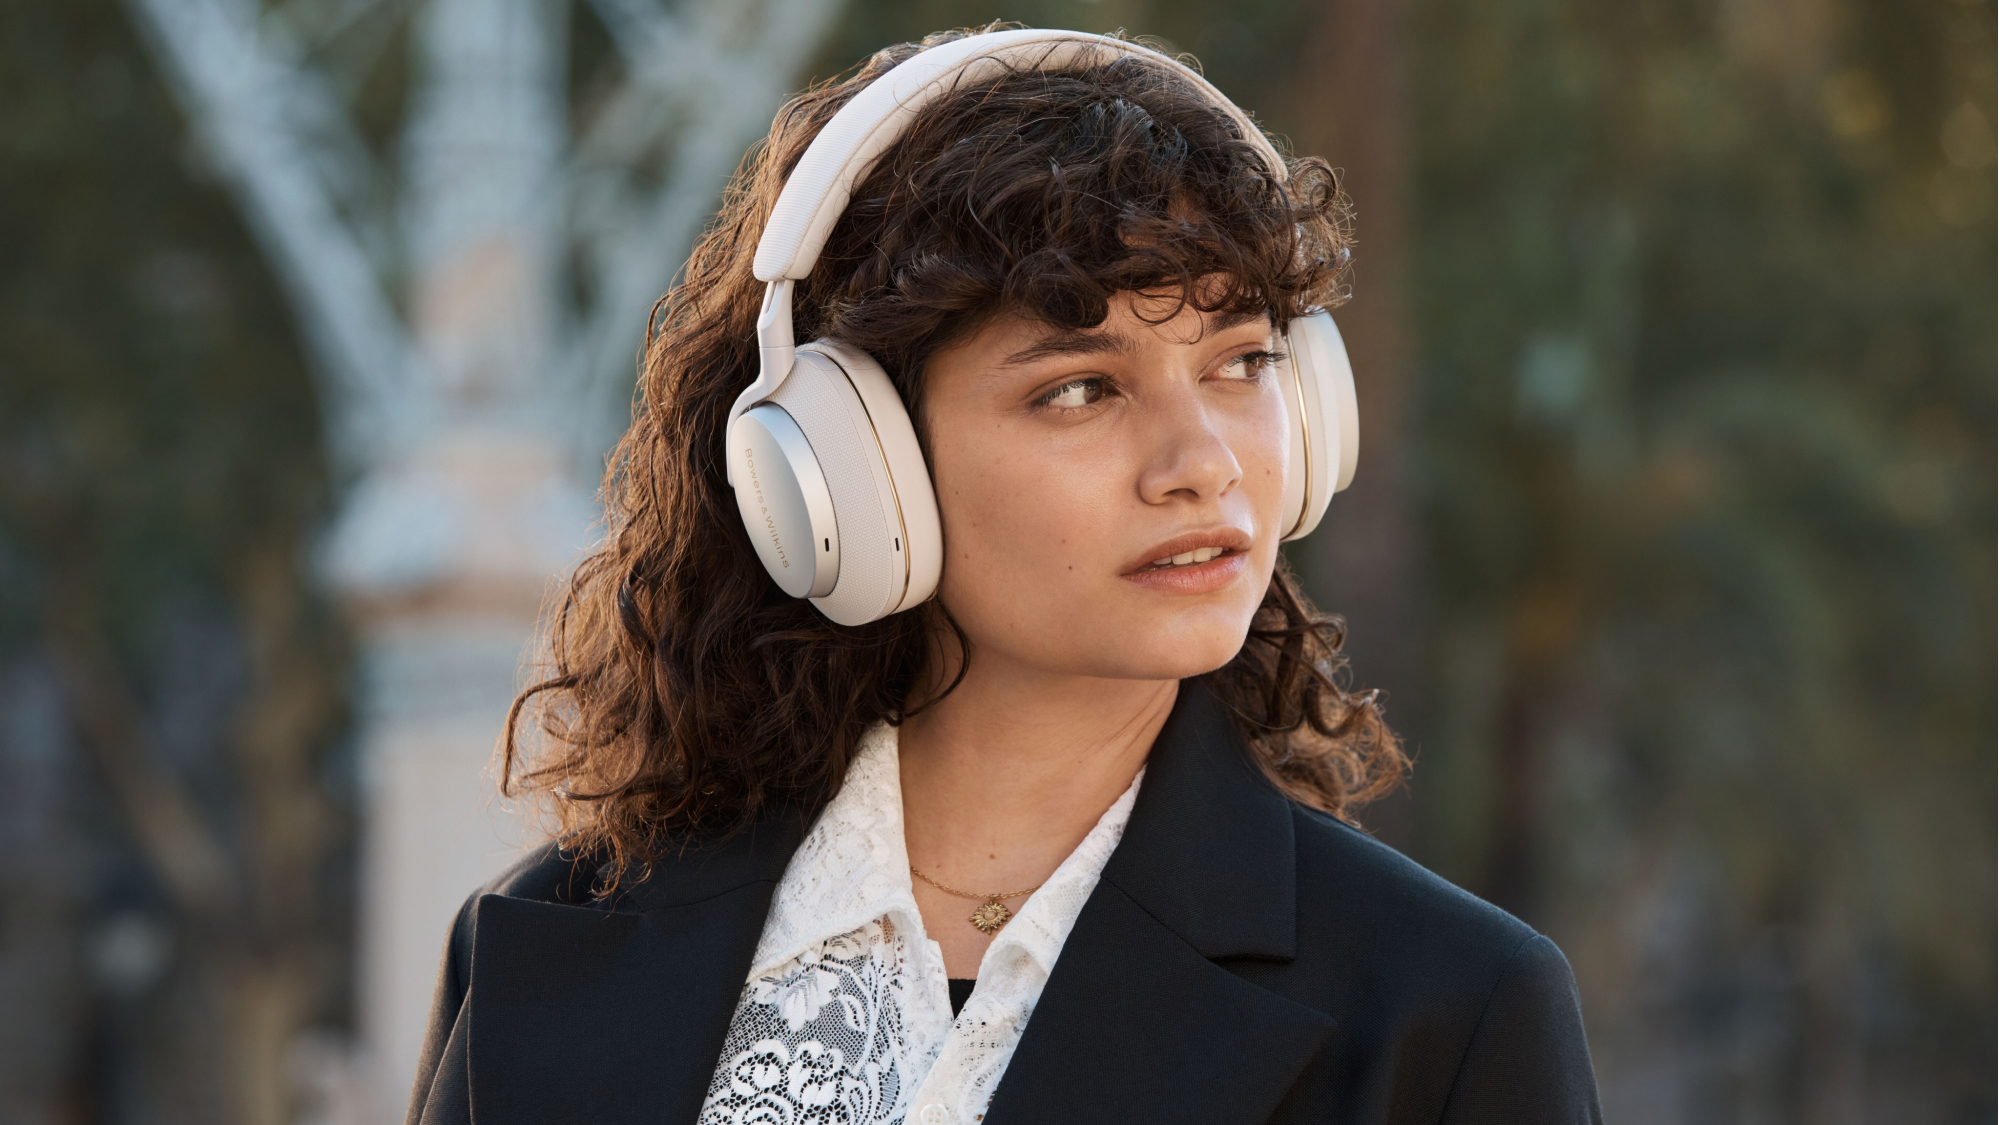 B&W's upgraded noise-cancelling headphones are here to take on the Sony WH- 1000XM5